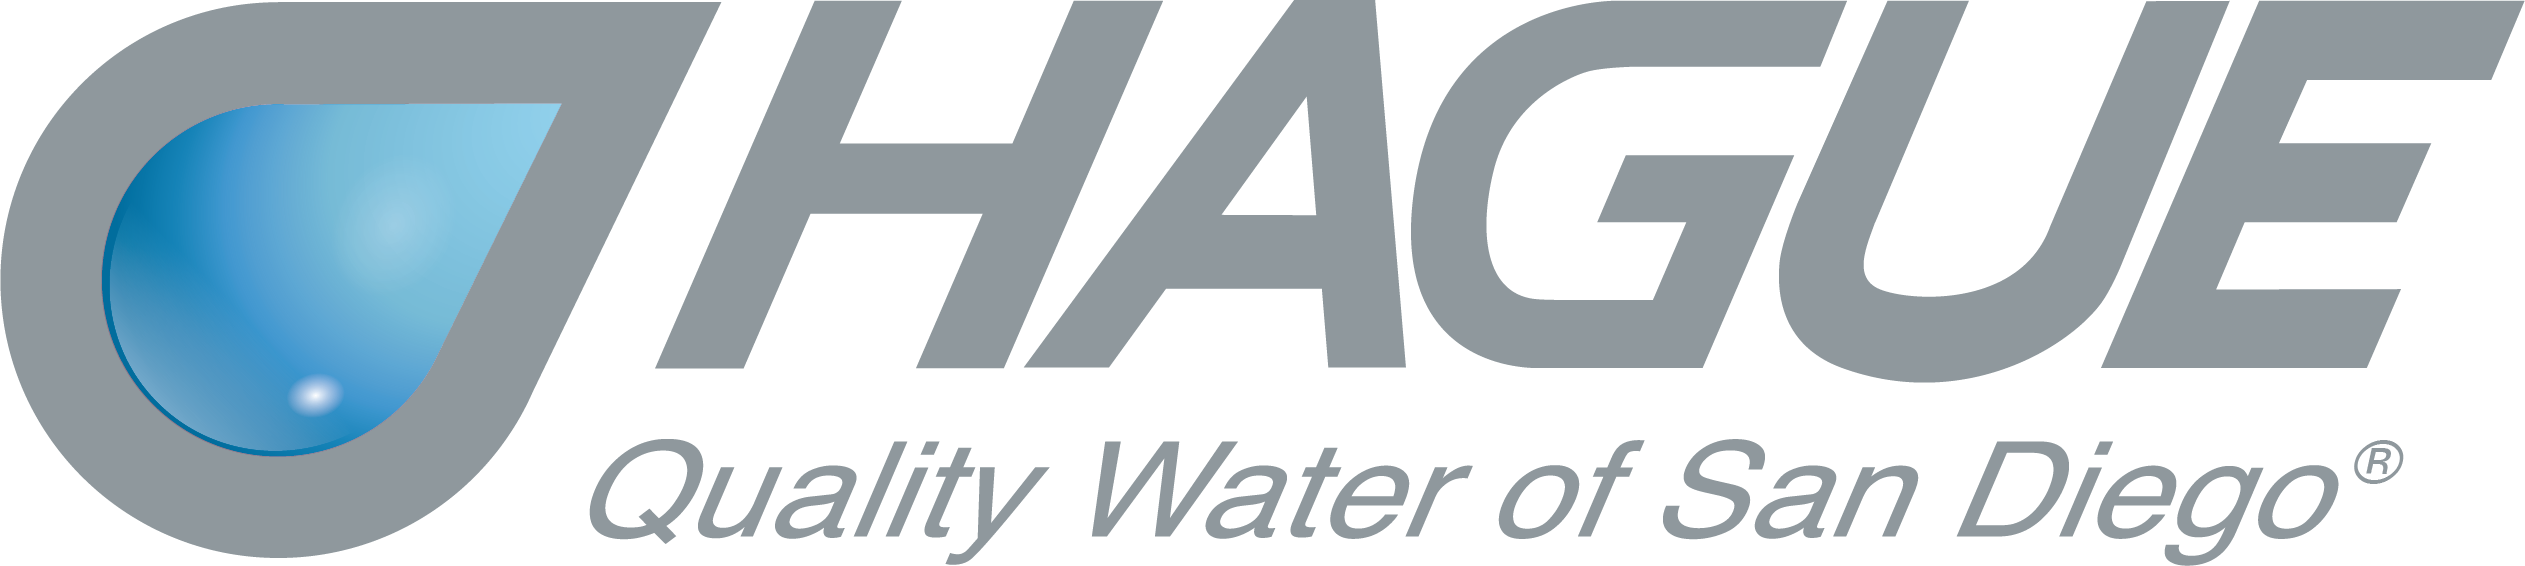 Hague Quality Water Logo